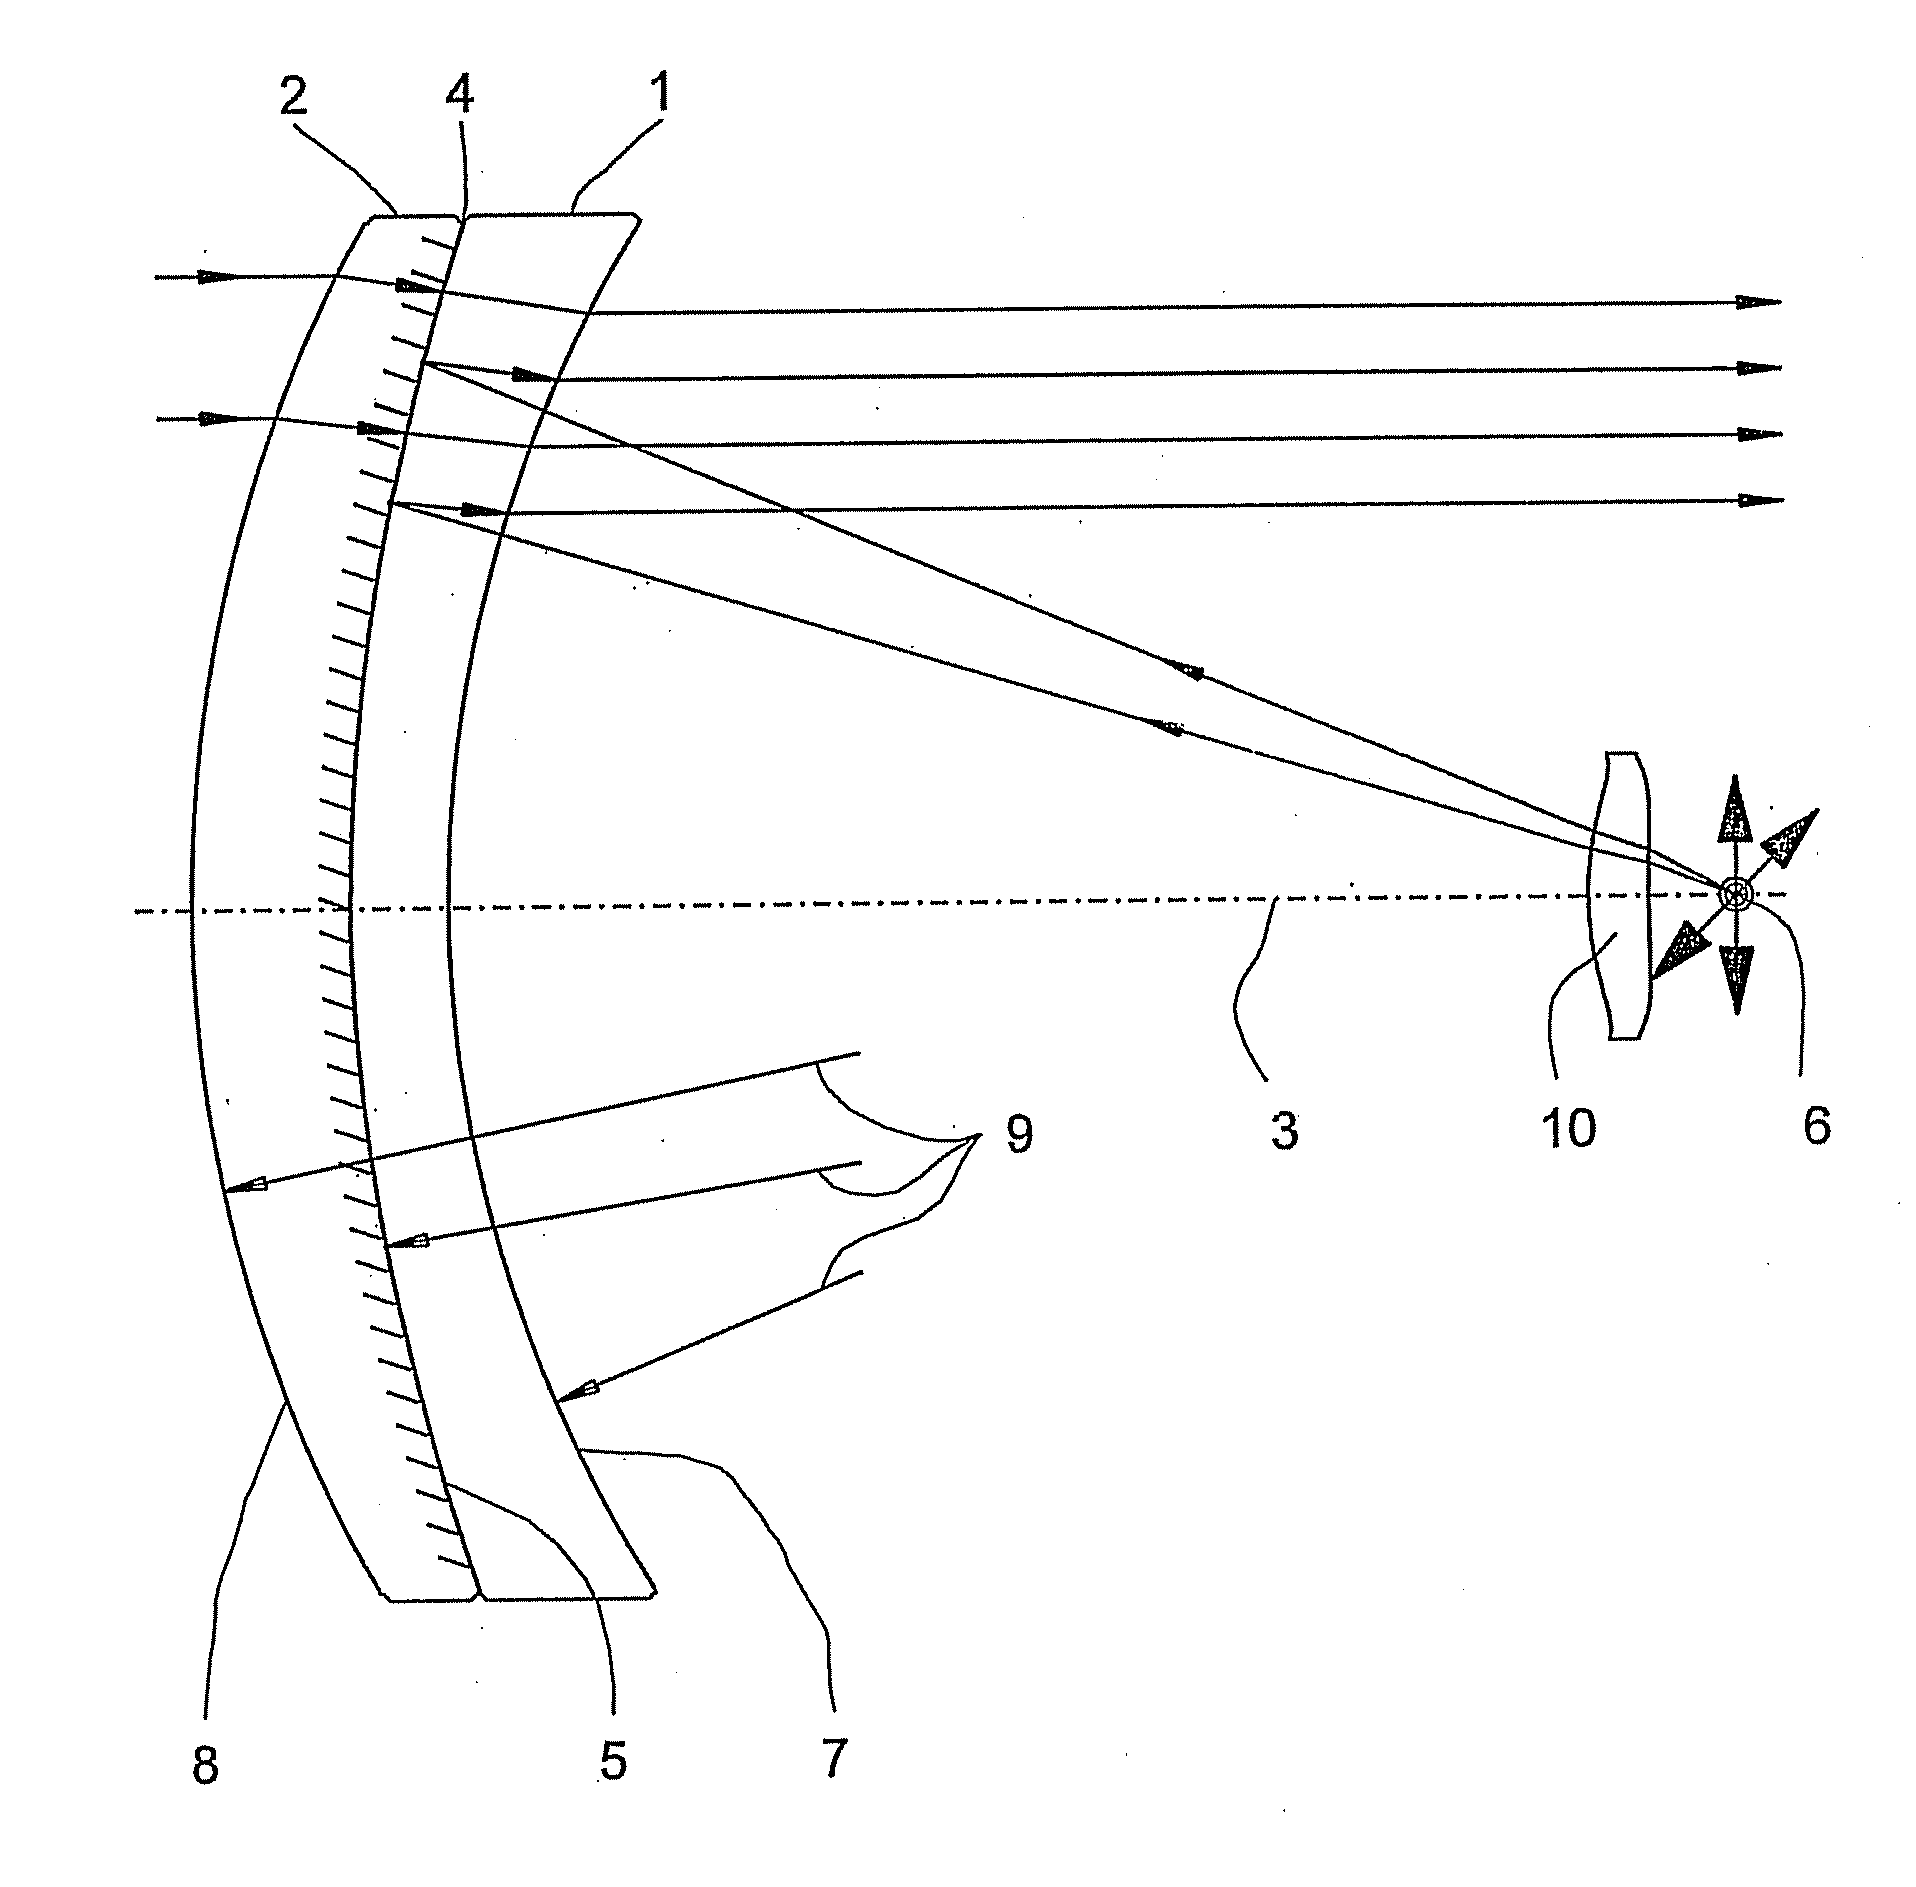 Coaxially Arranged, Off-Axis Optical System for a Sighting Device or Aiming Device